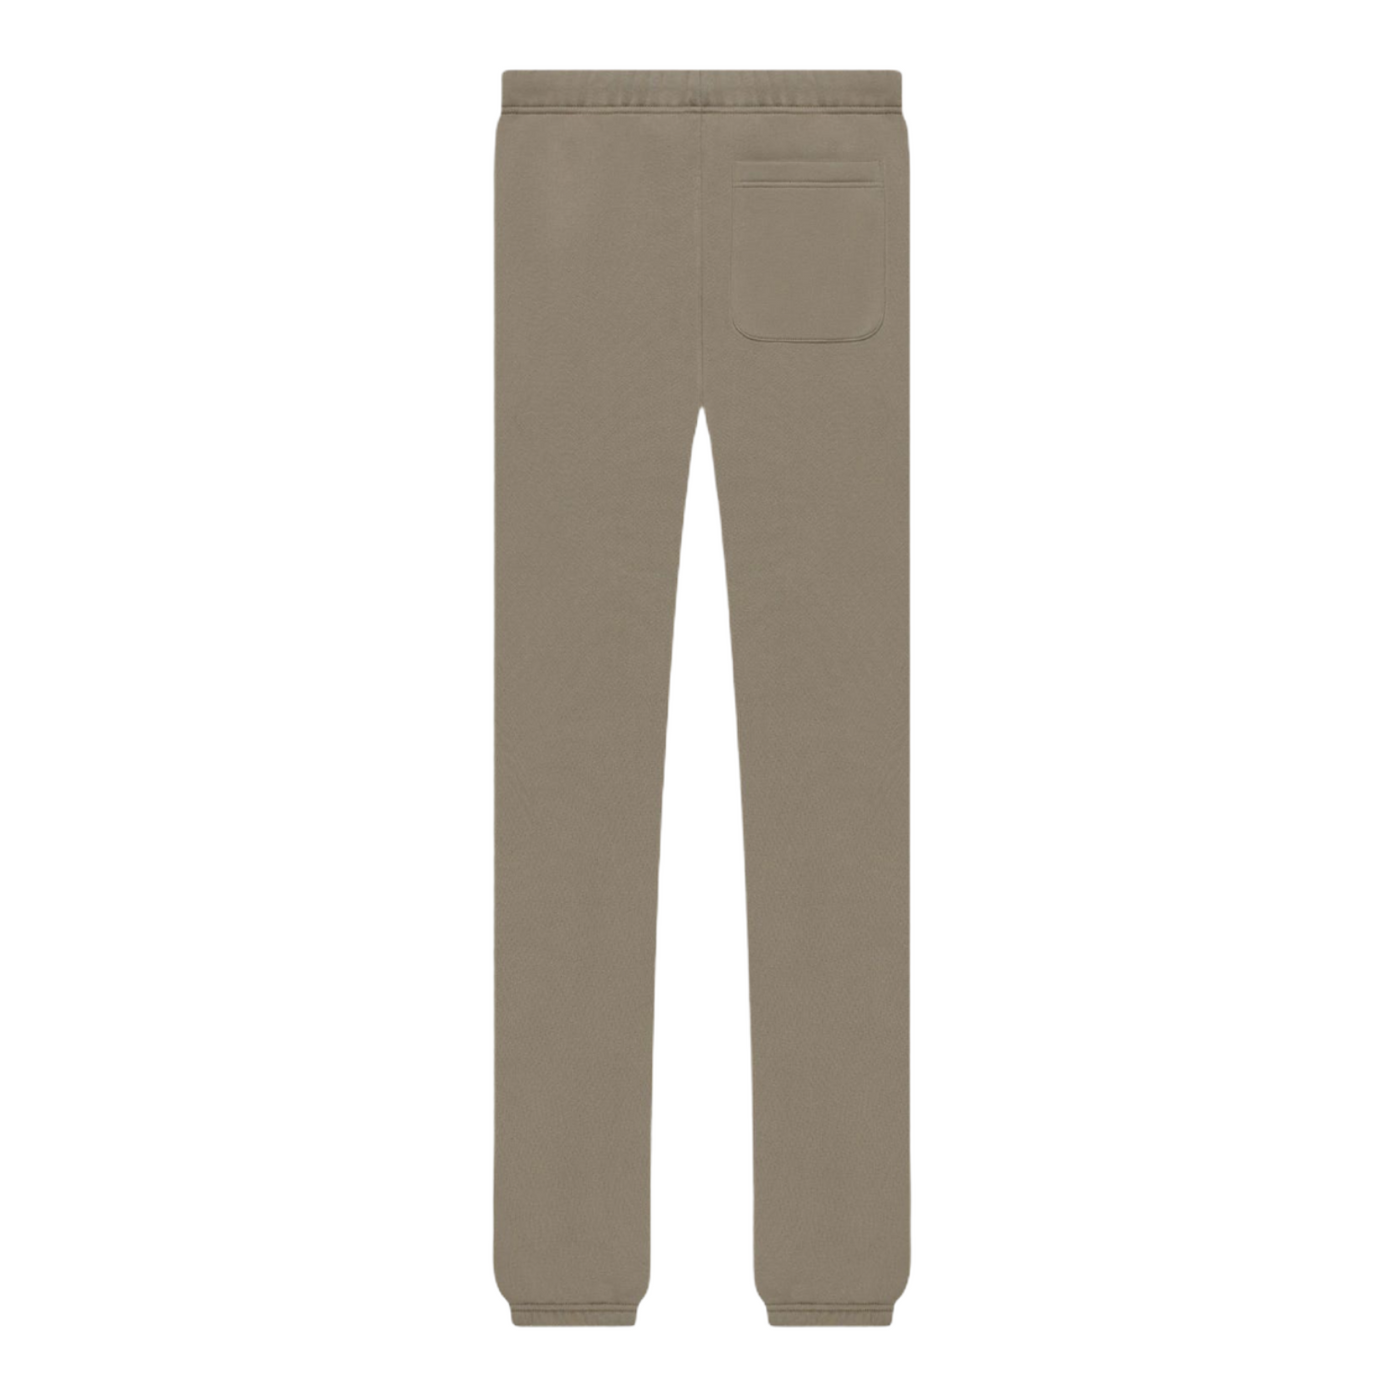 FEAR OF GOD ESSENTIALS TAUPE SWEATPANTS (SS21)